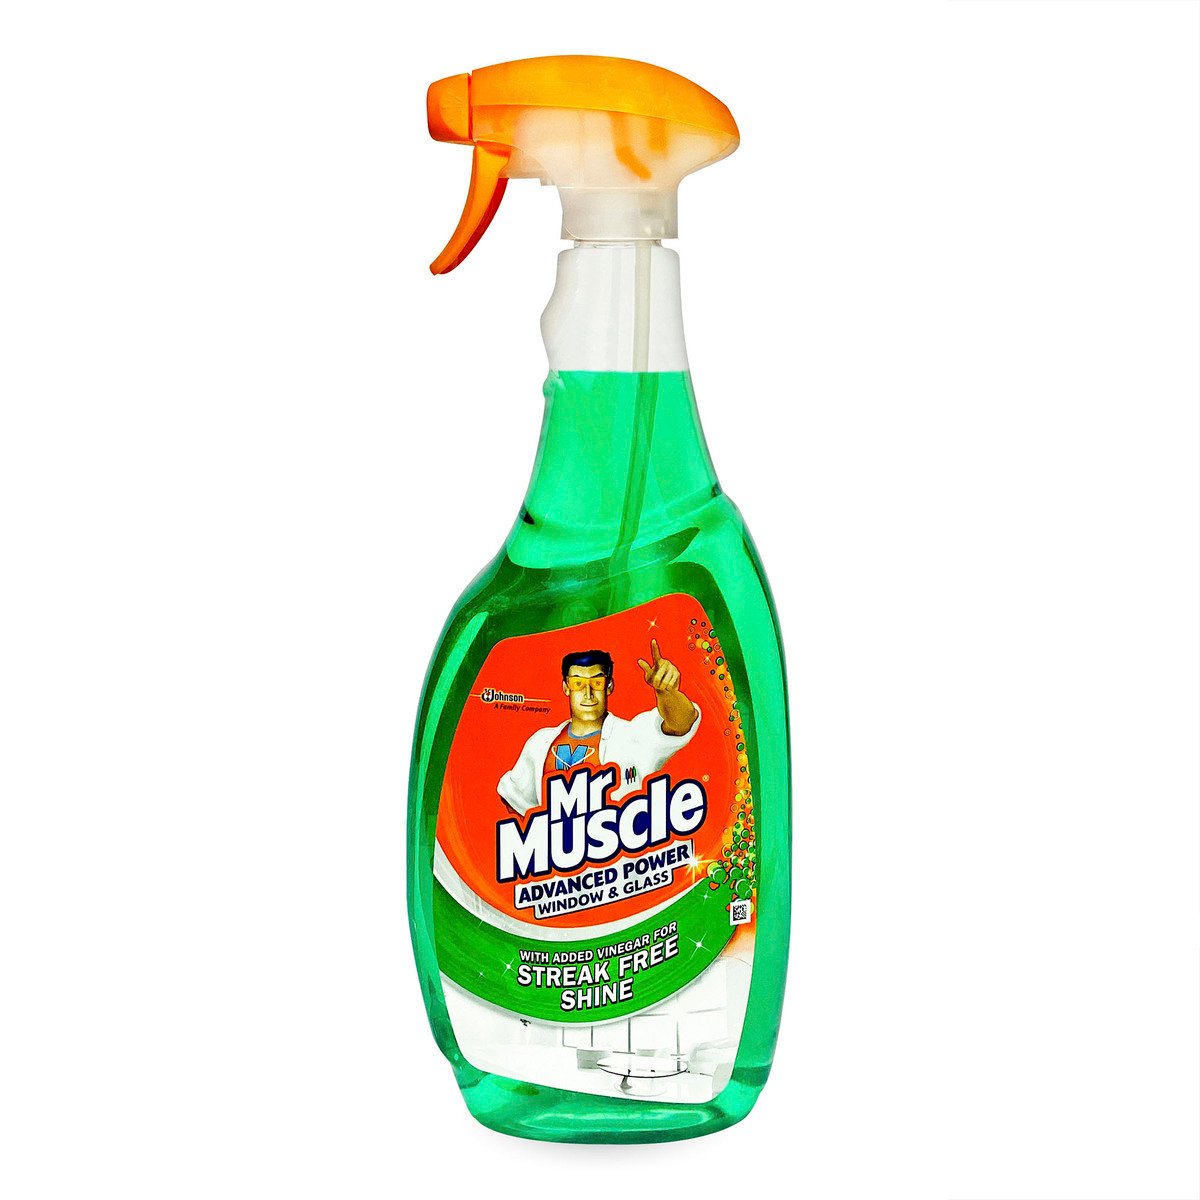 Mr. Muscle Window & Glass Cleaning Spray Advanced Power 750ml